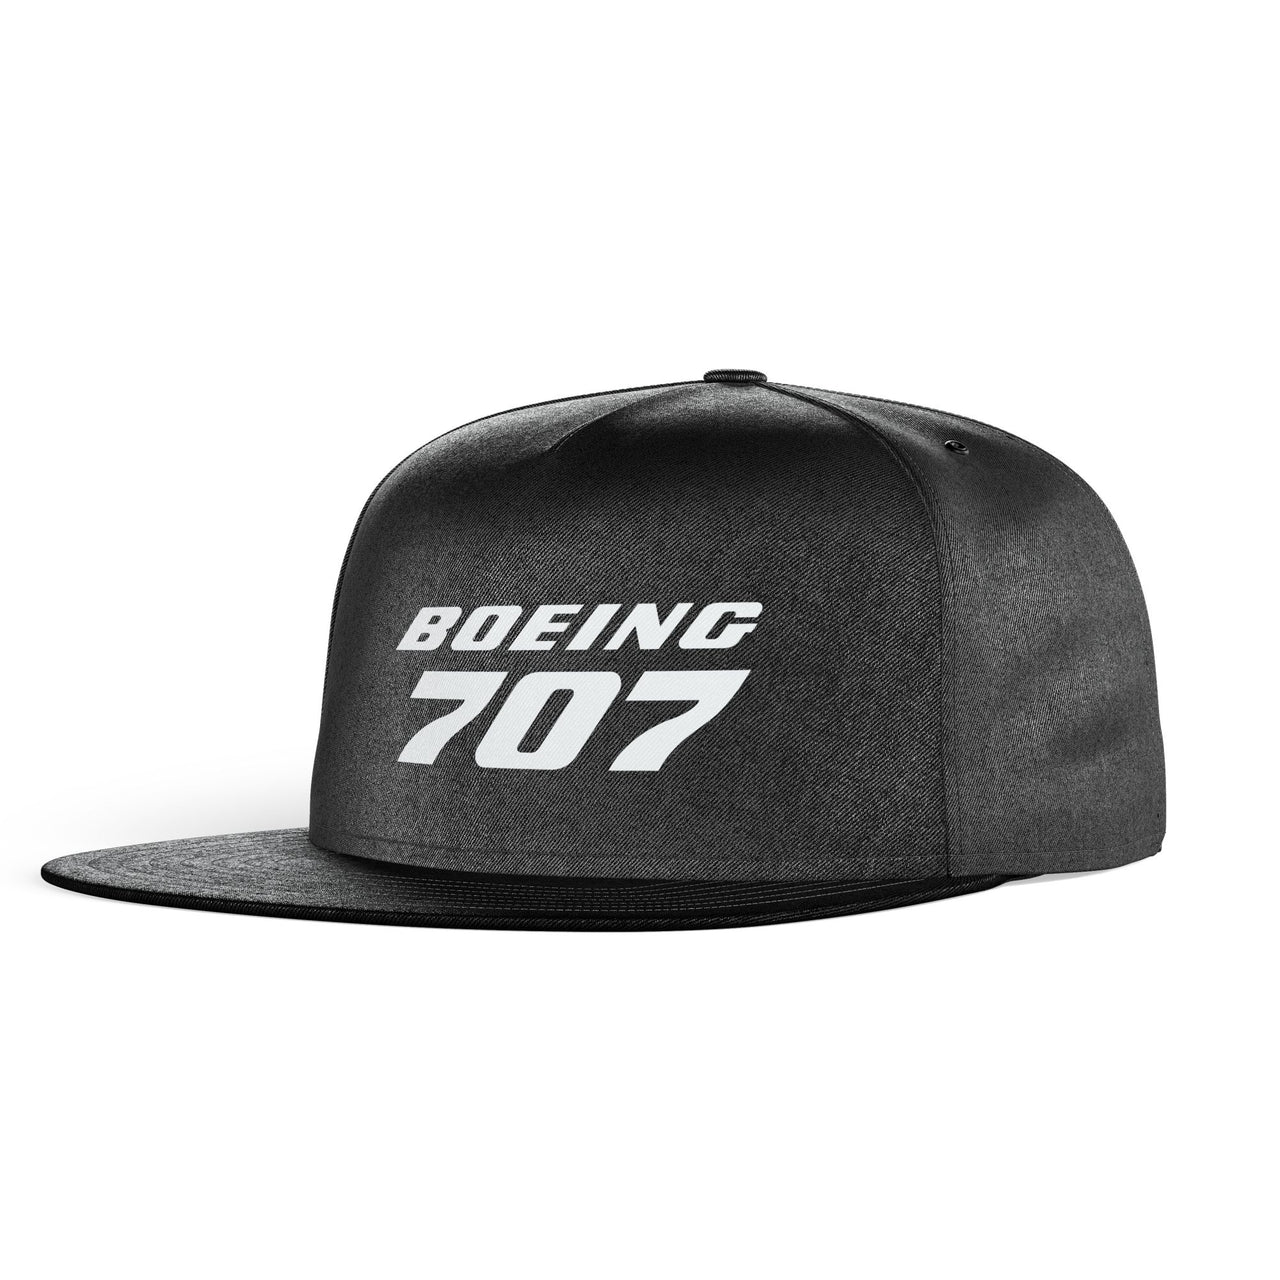 Boeing 707 & Text Designed Snapback Caps & Hats